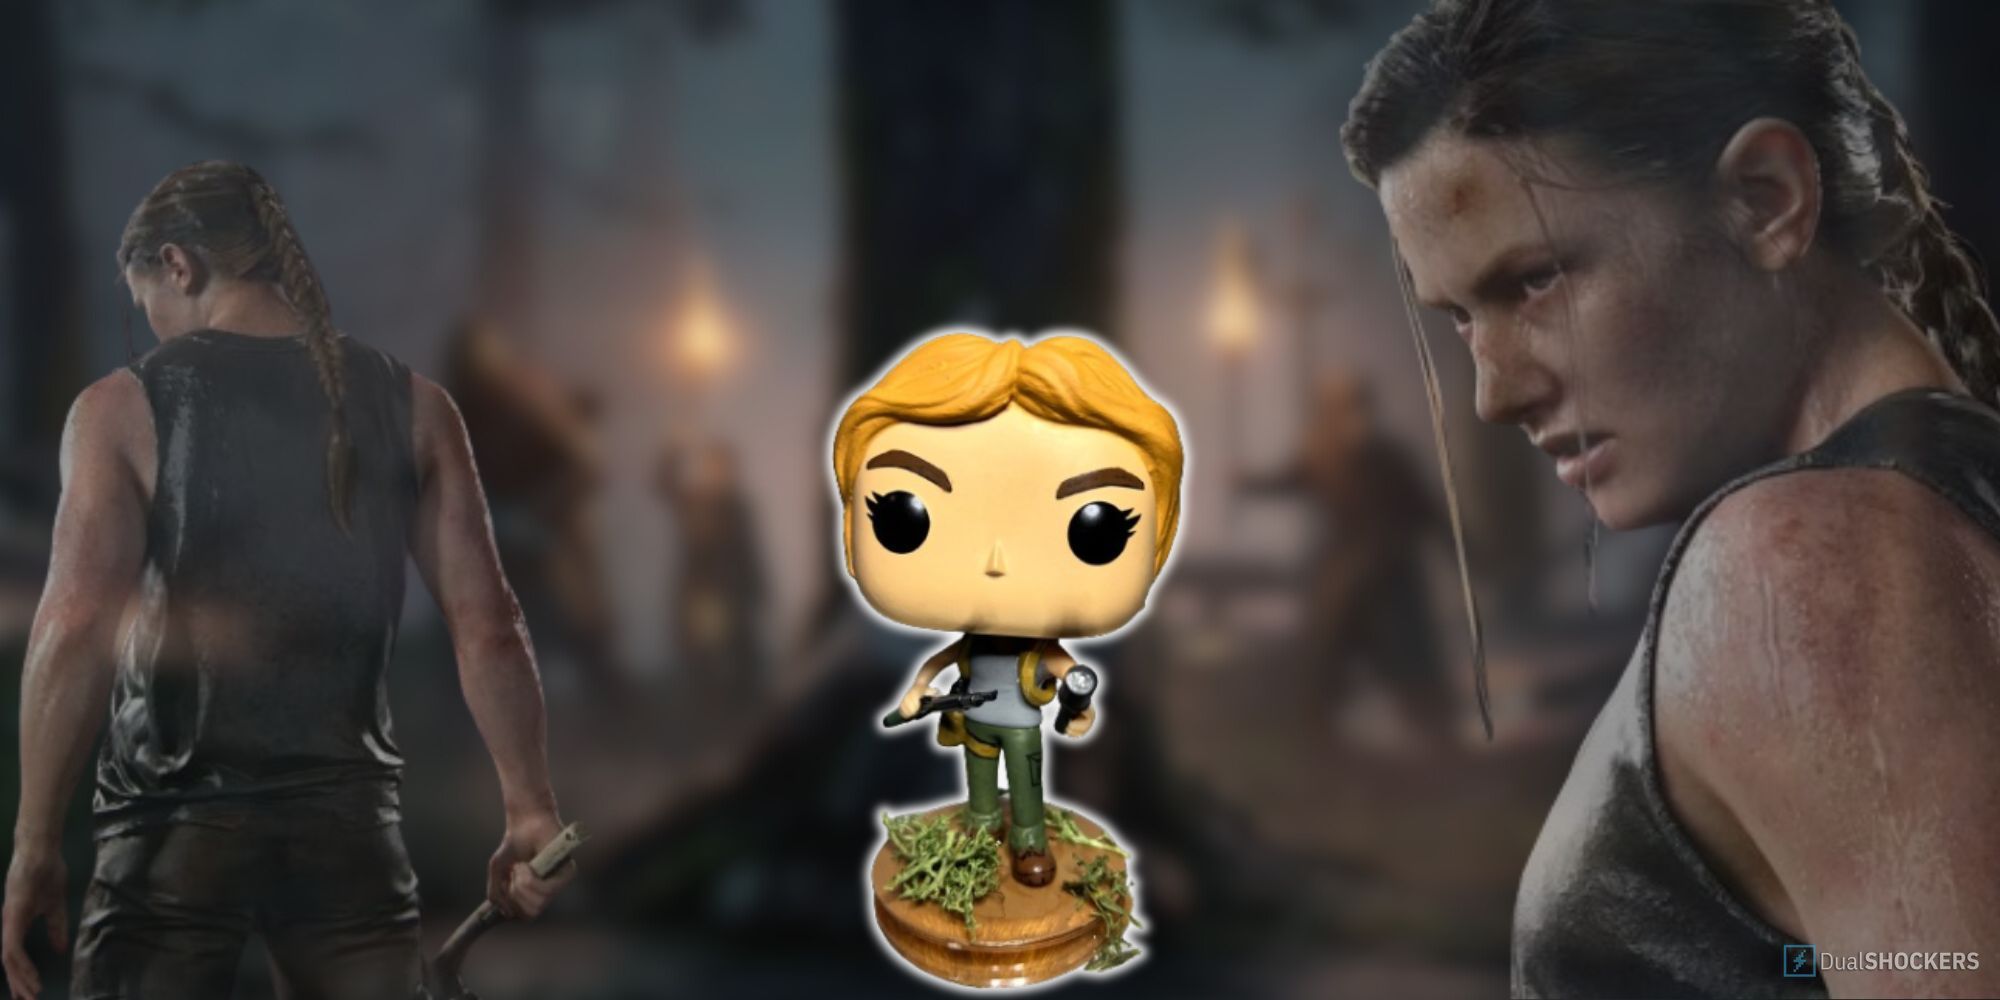 Feature image showing Abby The Last of Us 2 Pop Figure with faded images of the antagonist on either side.